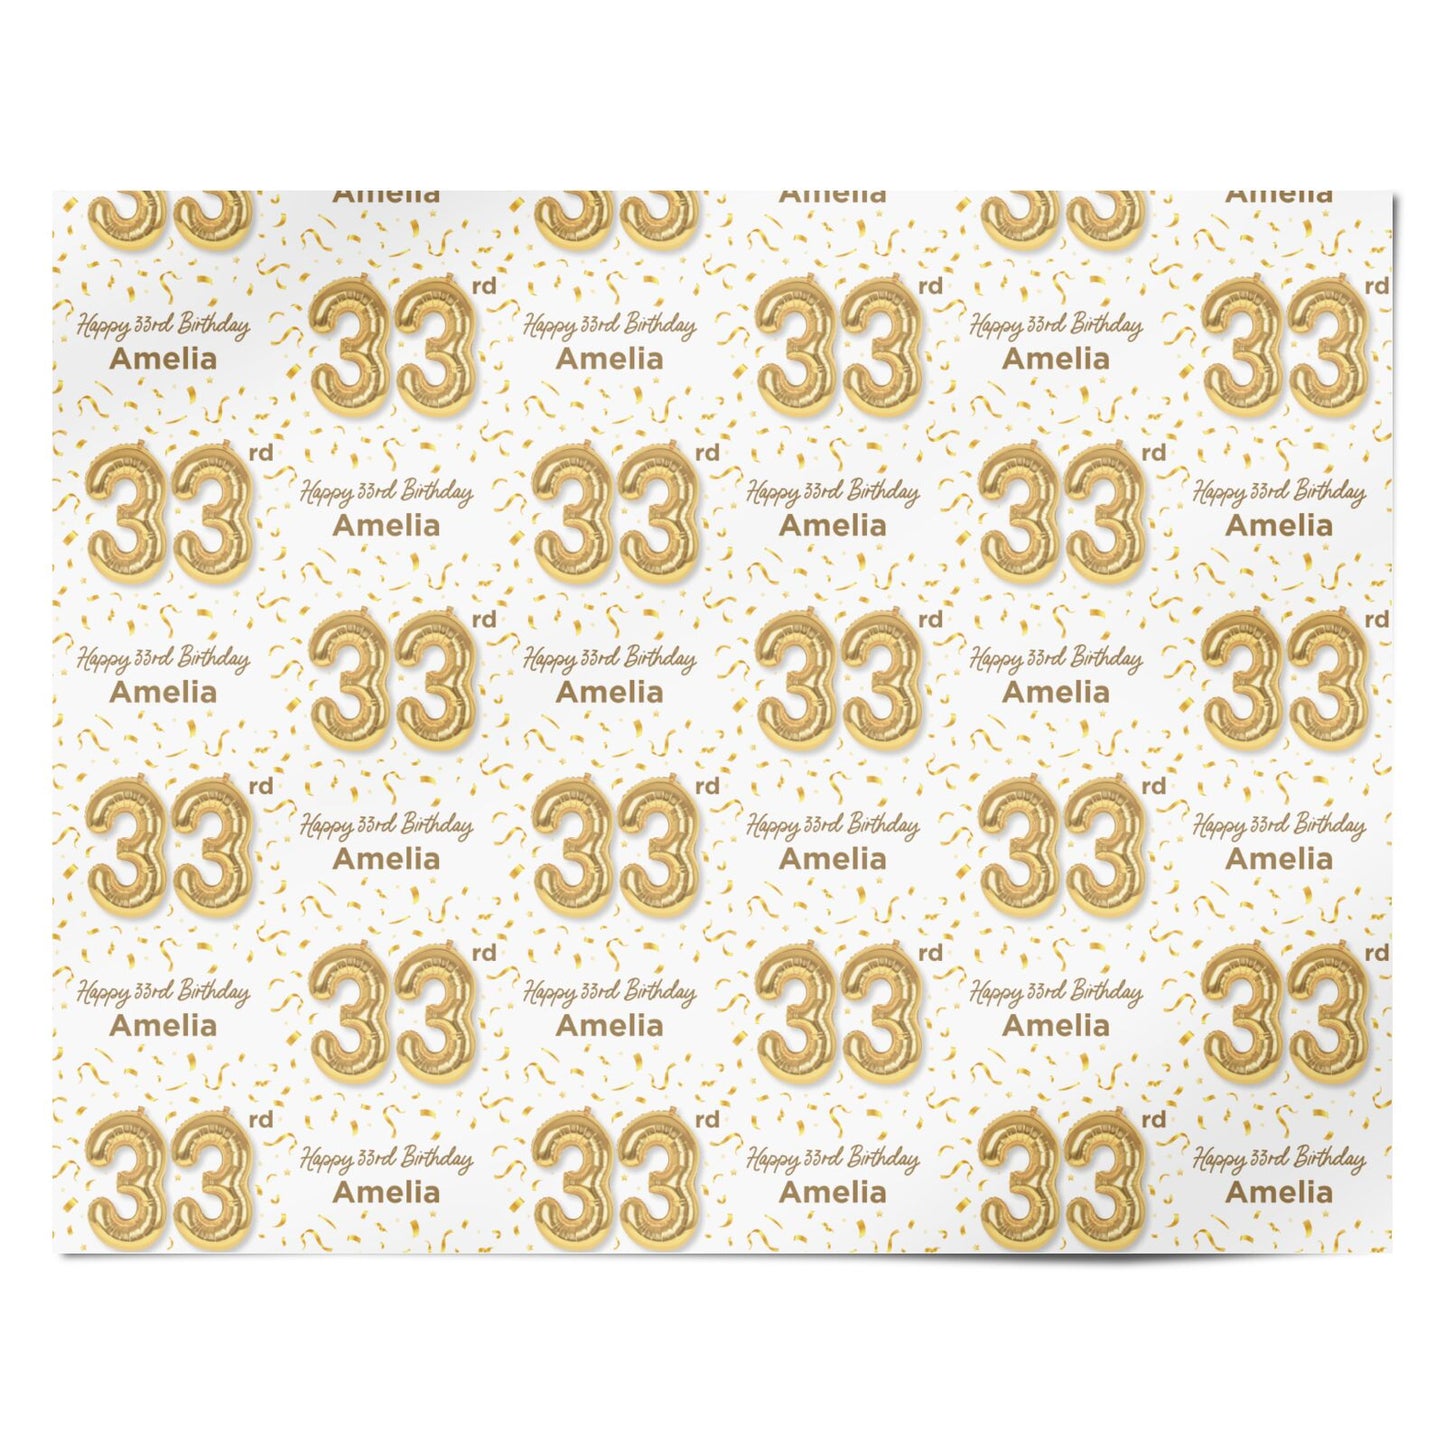 Personalised 33rd Birthday Personalised Wrapping Paper Alternative